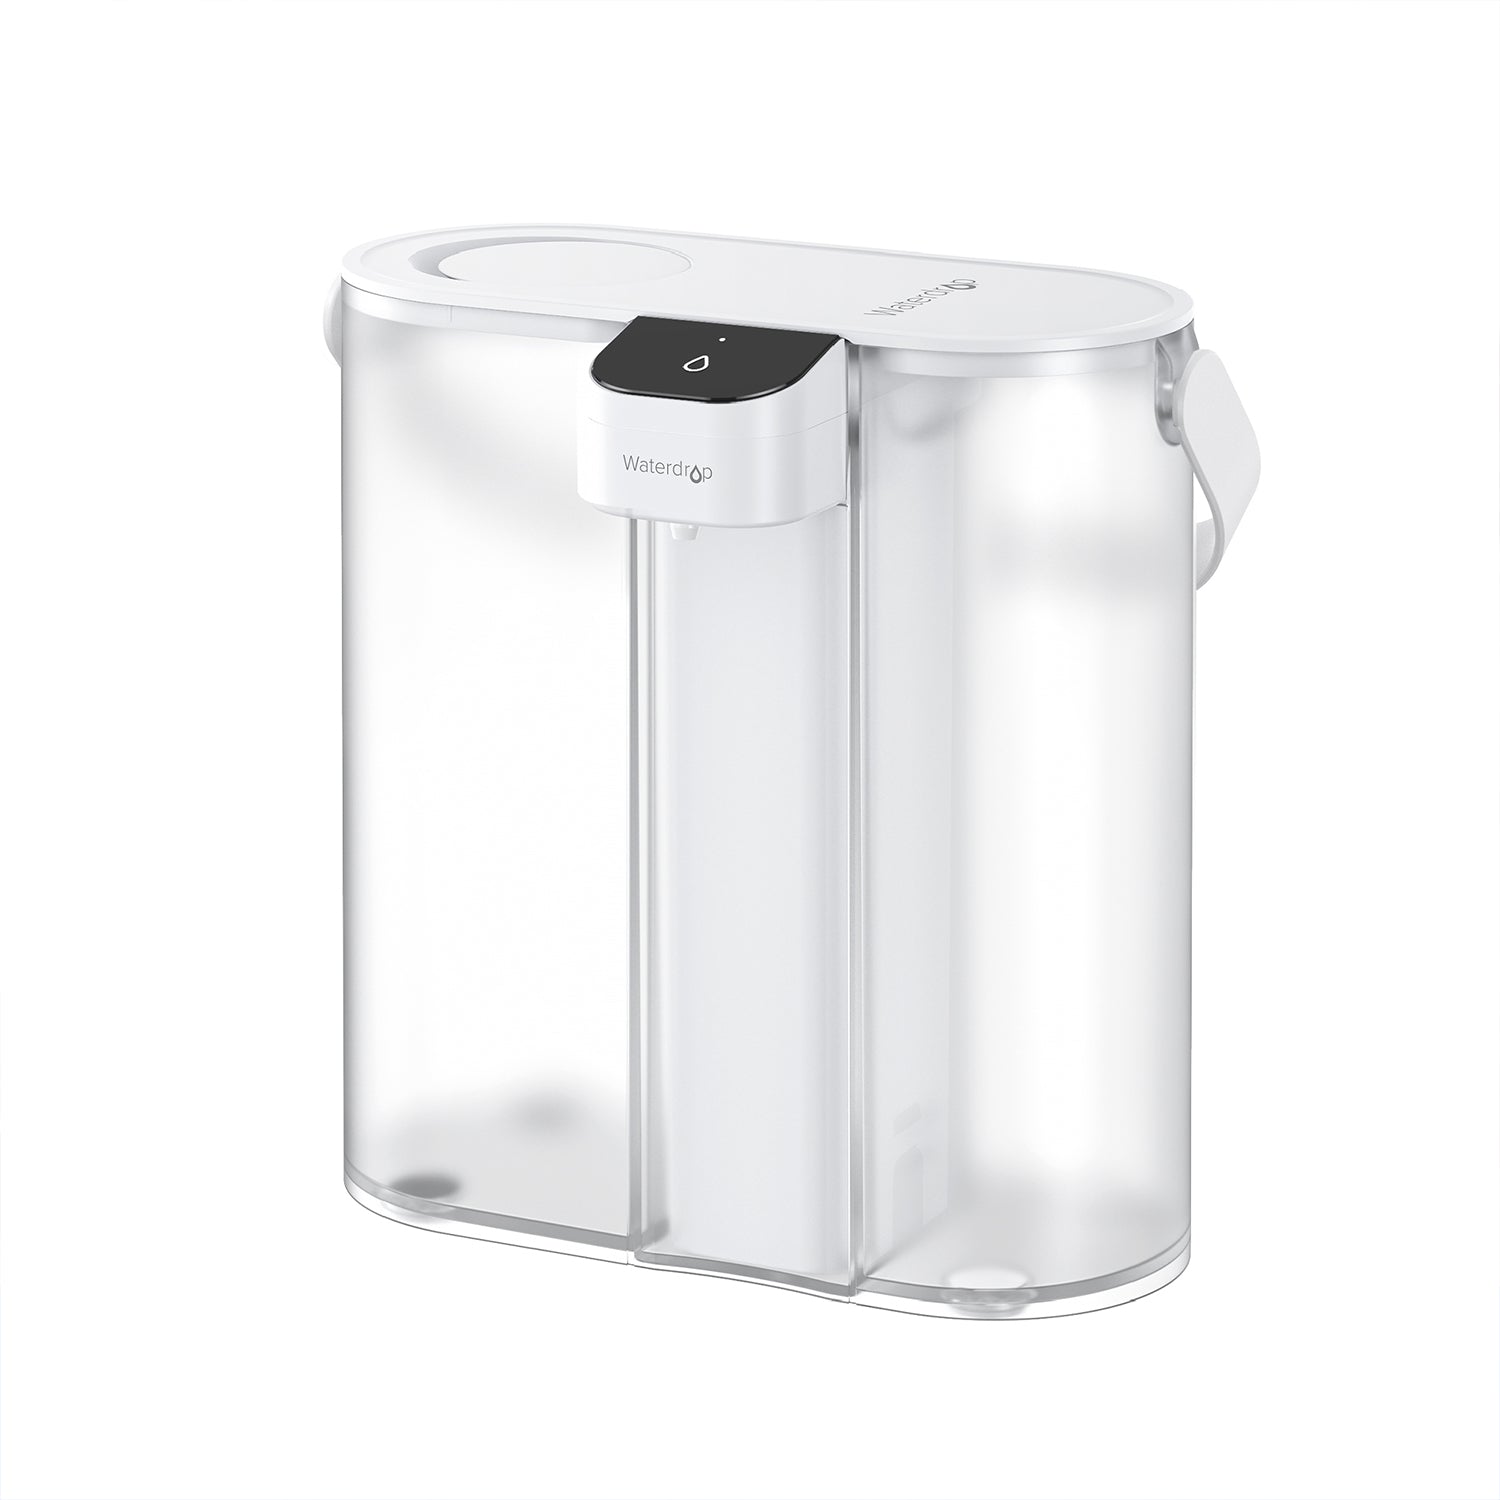 Compact Electric Water Filter Pitcher ED02, 200-Gallon Filter for Fridge